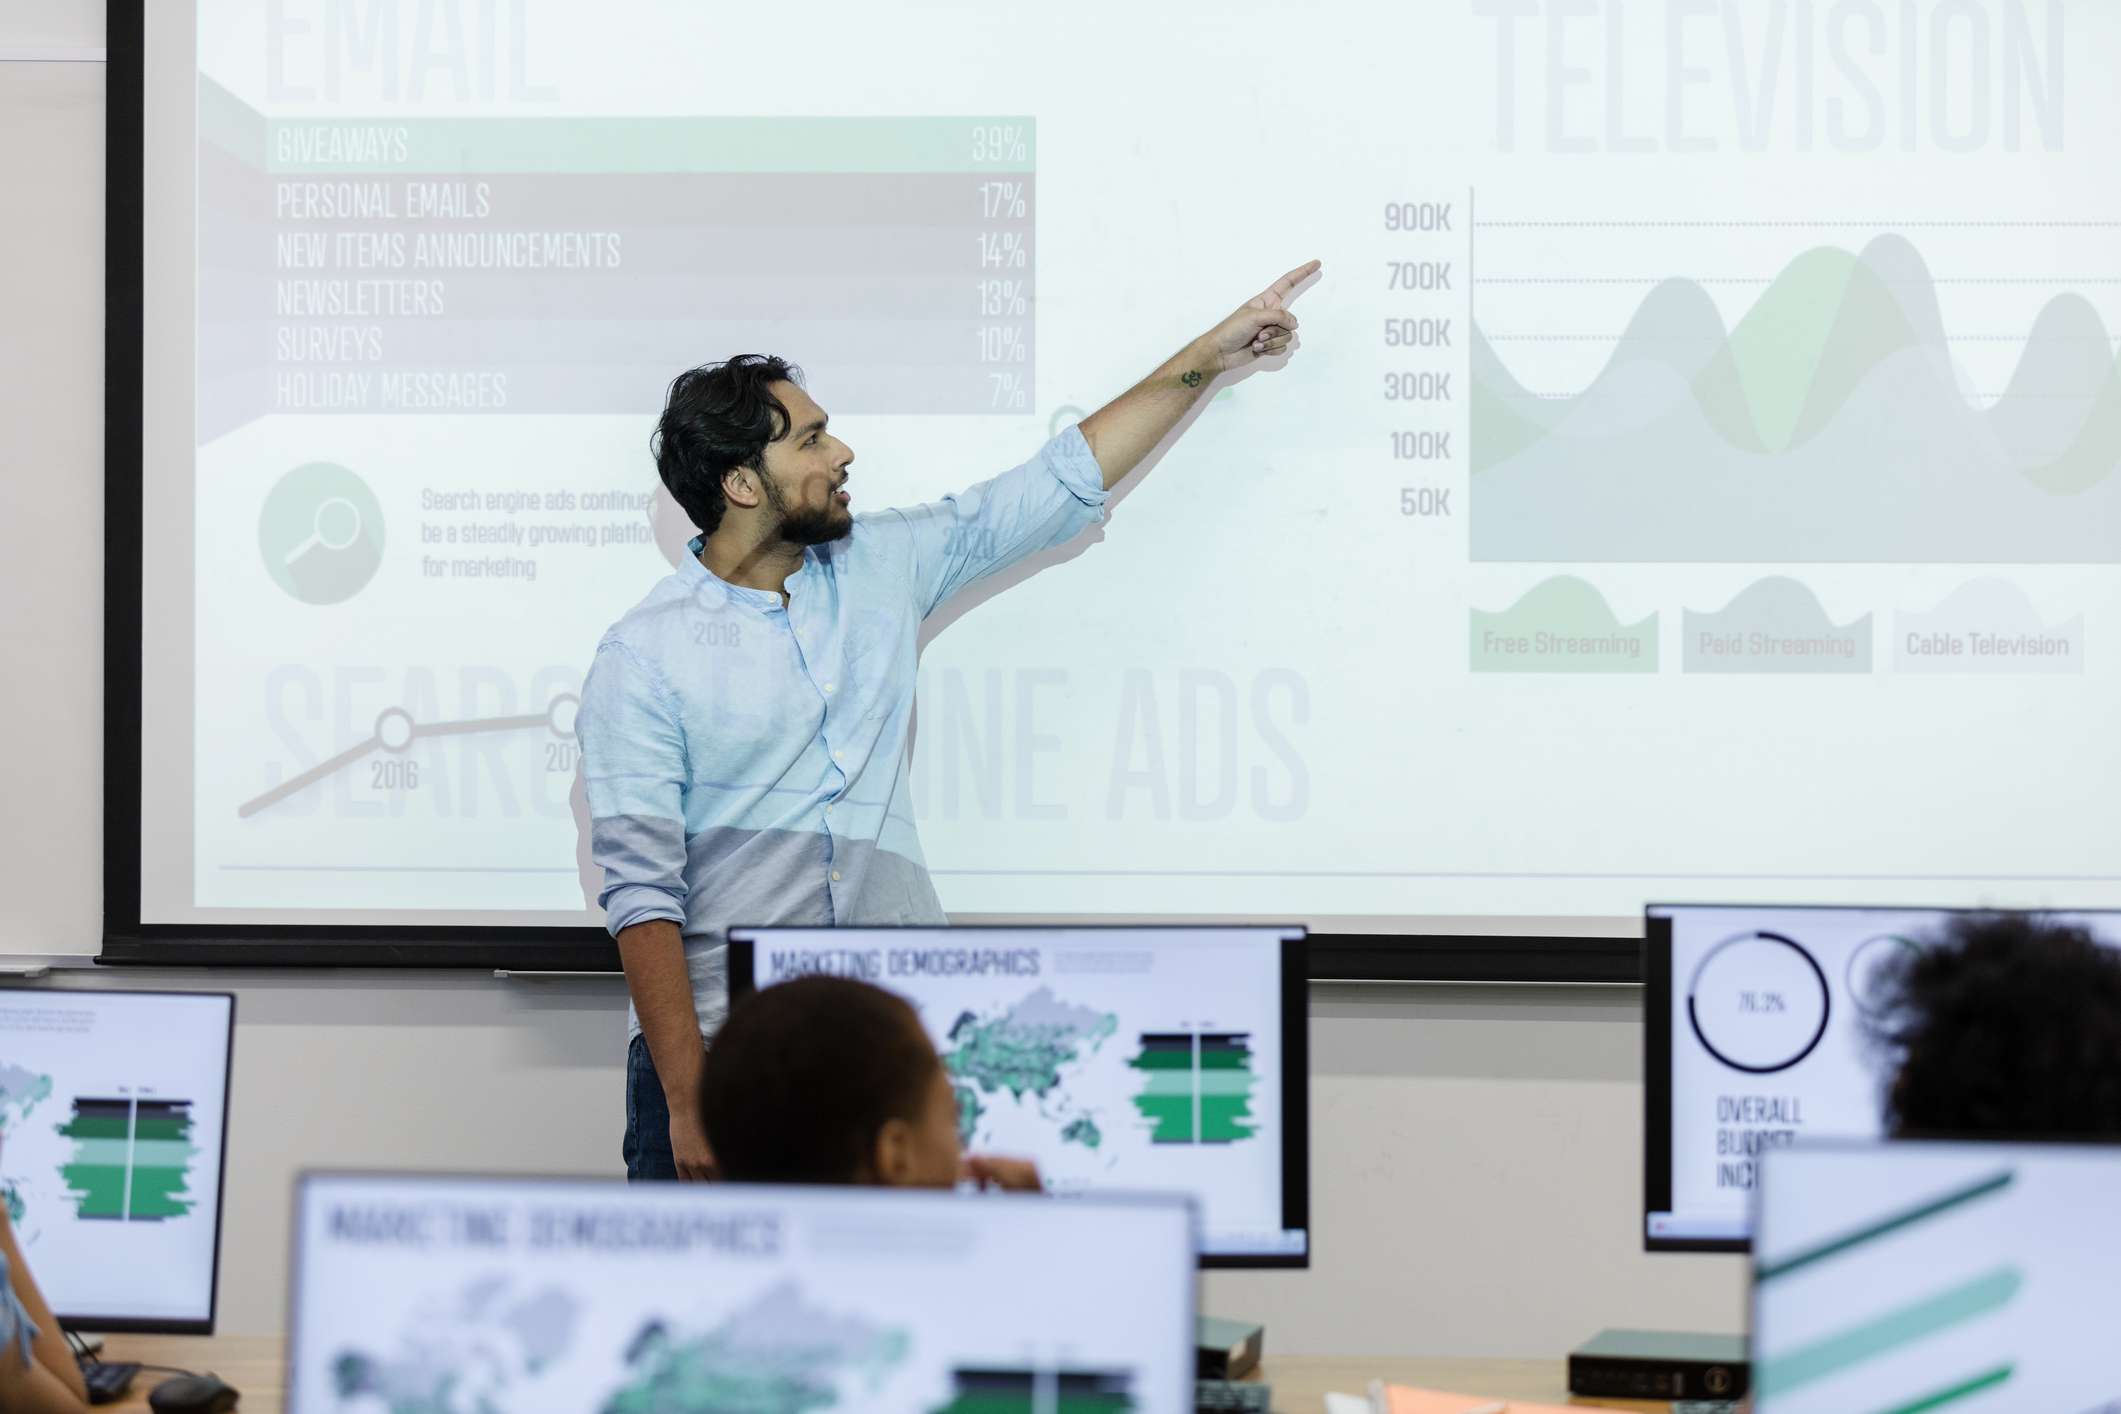 A young adult businessman lectures on technology in the university computer lab.